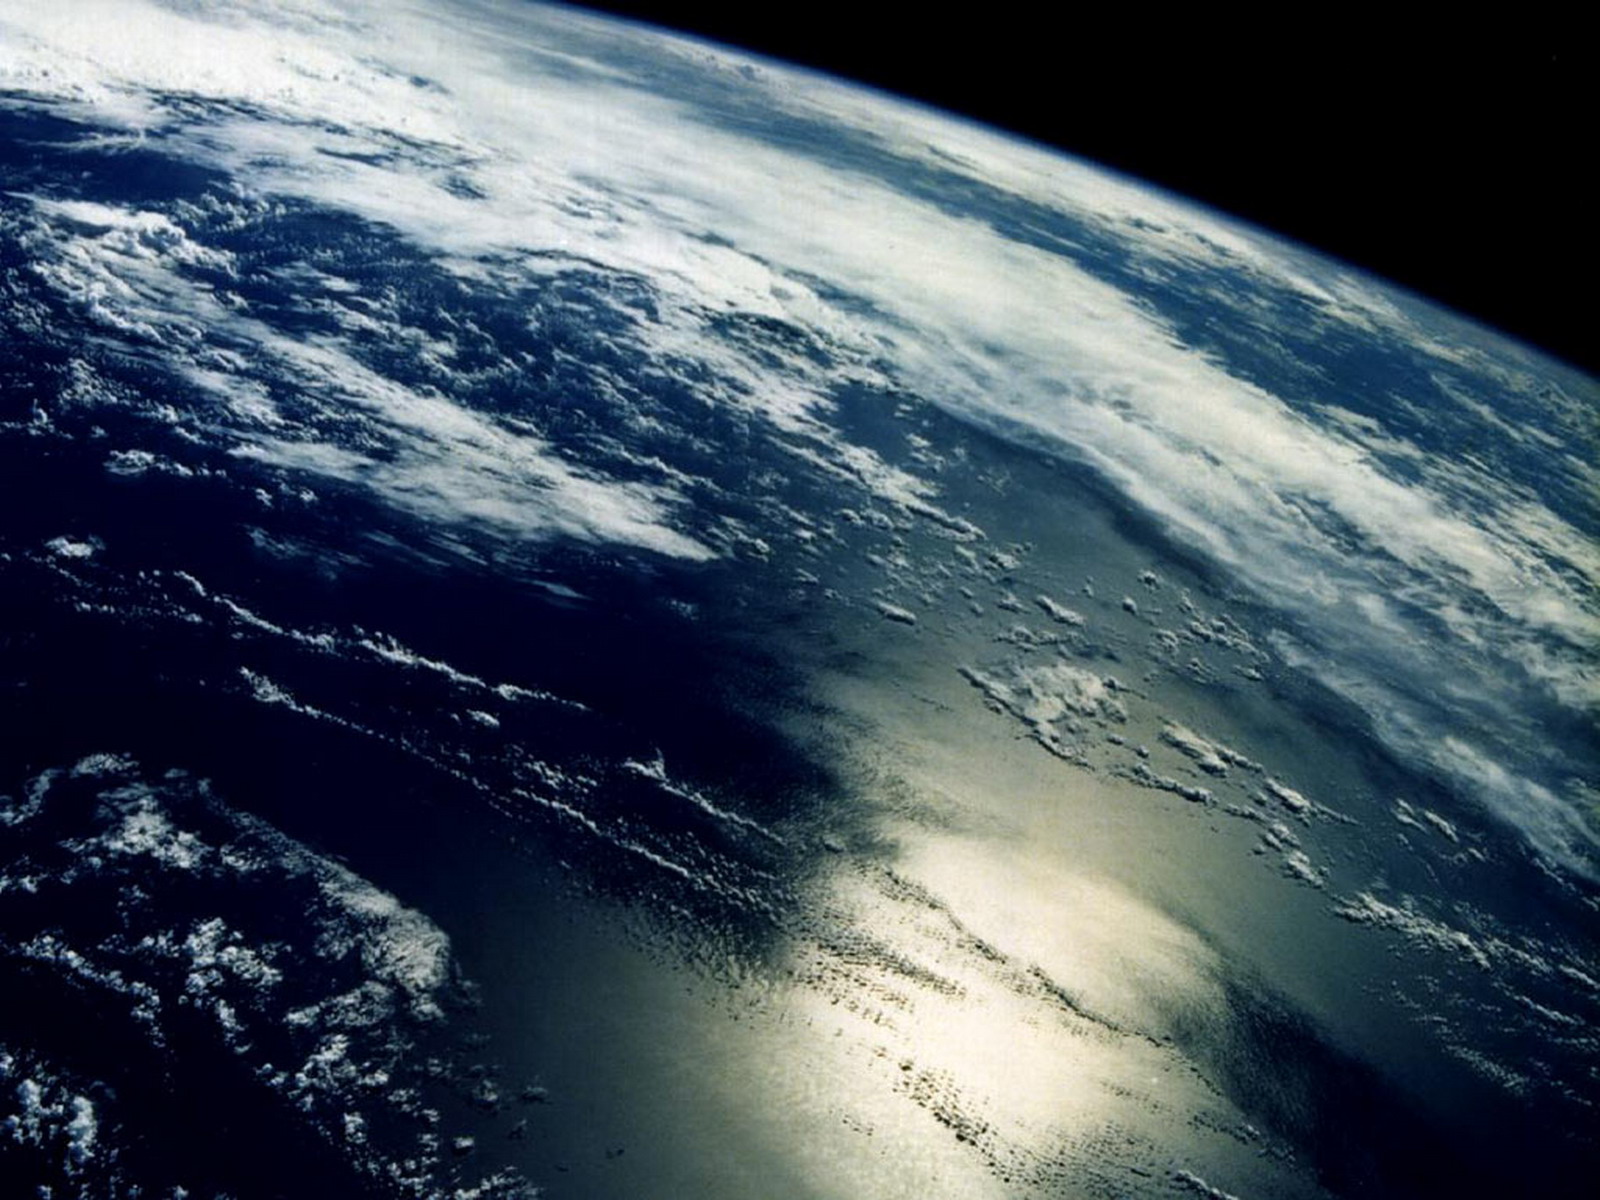 Earth Space Wallpaper For Iphone - Kemecer.com